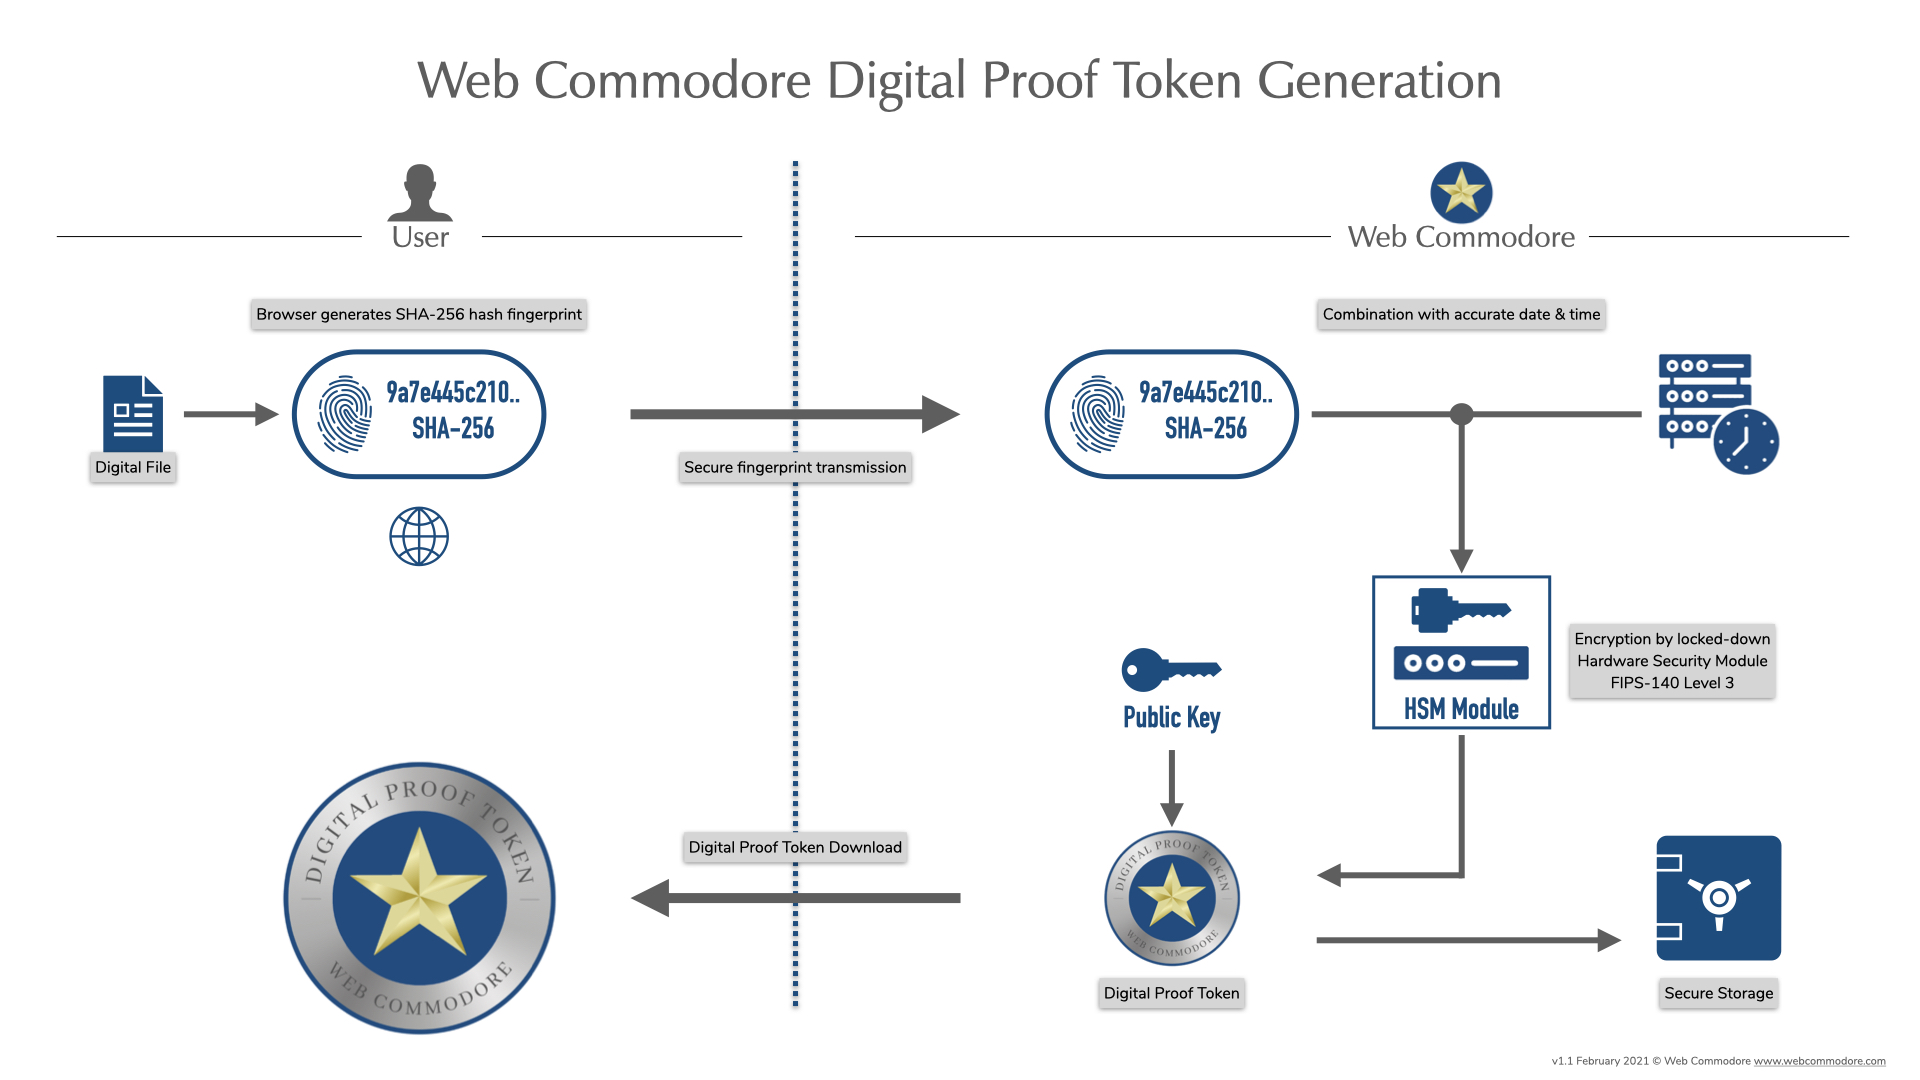 How it works: Web Commodore Digital Proof Token Generation